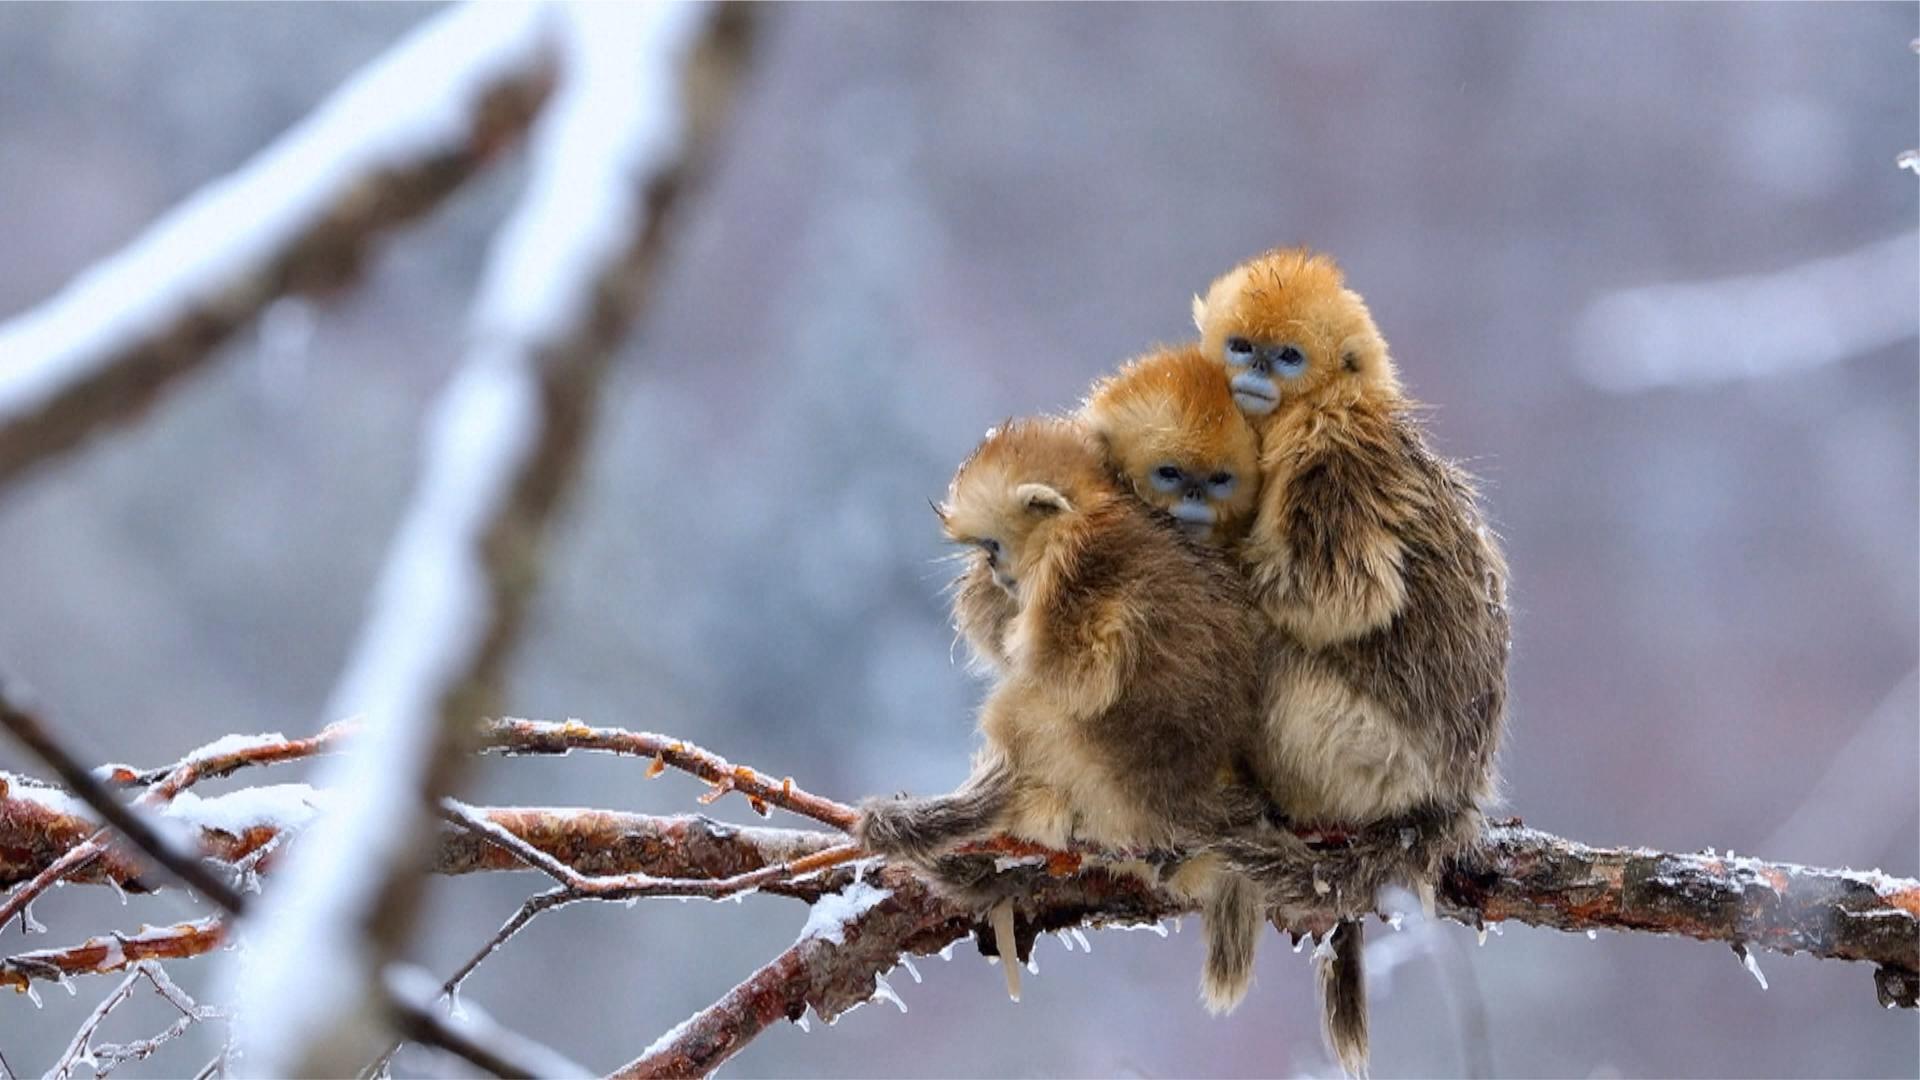 Wild animals cuddle up to survive harsh winter in N China - CGTN